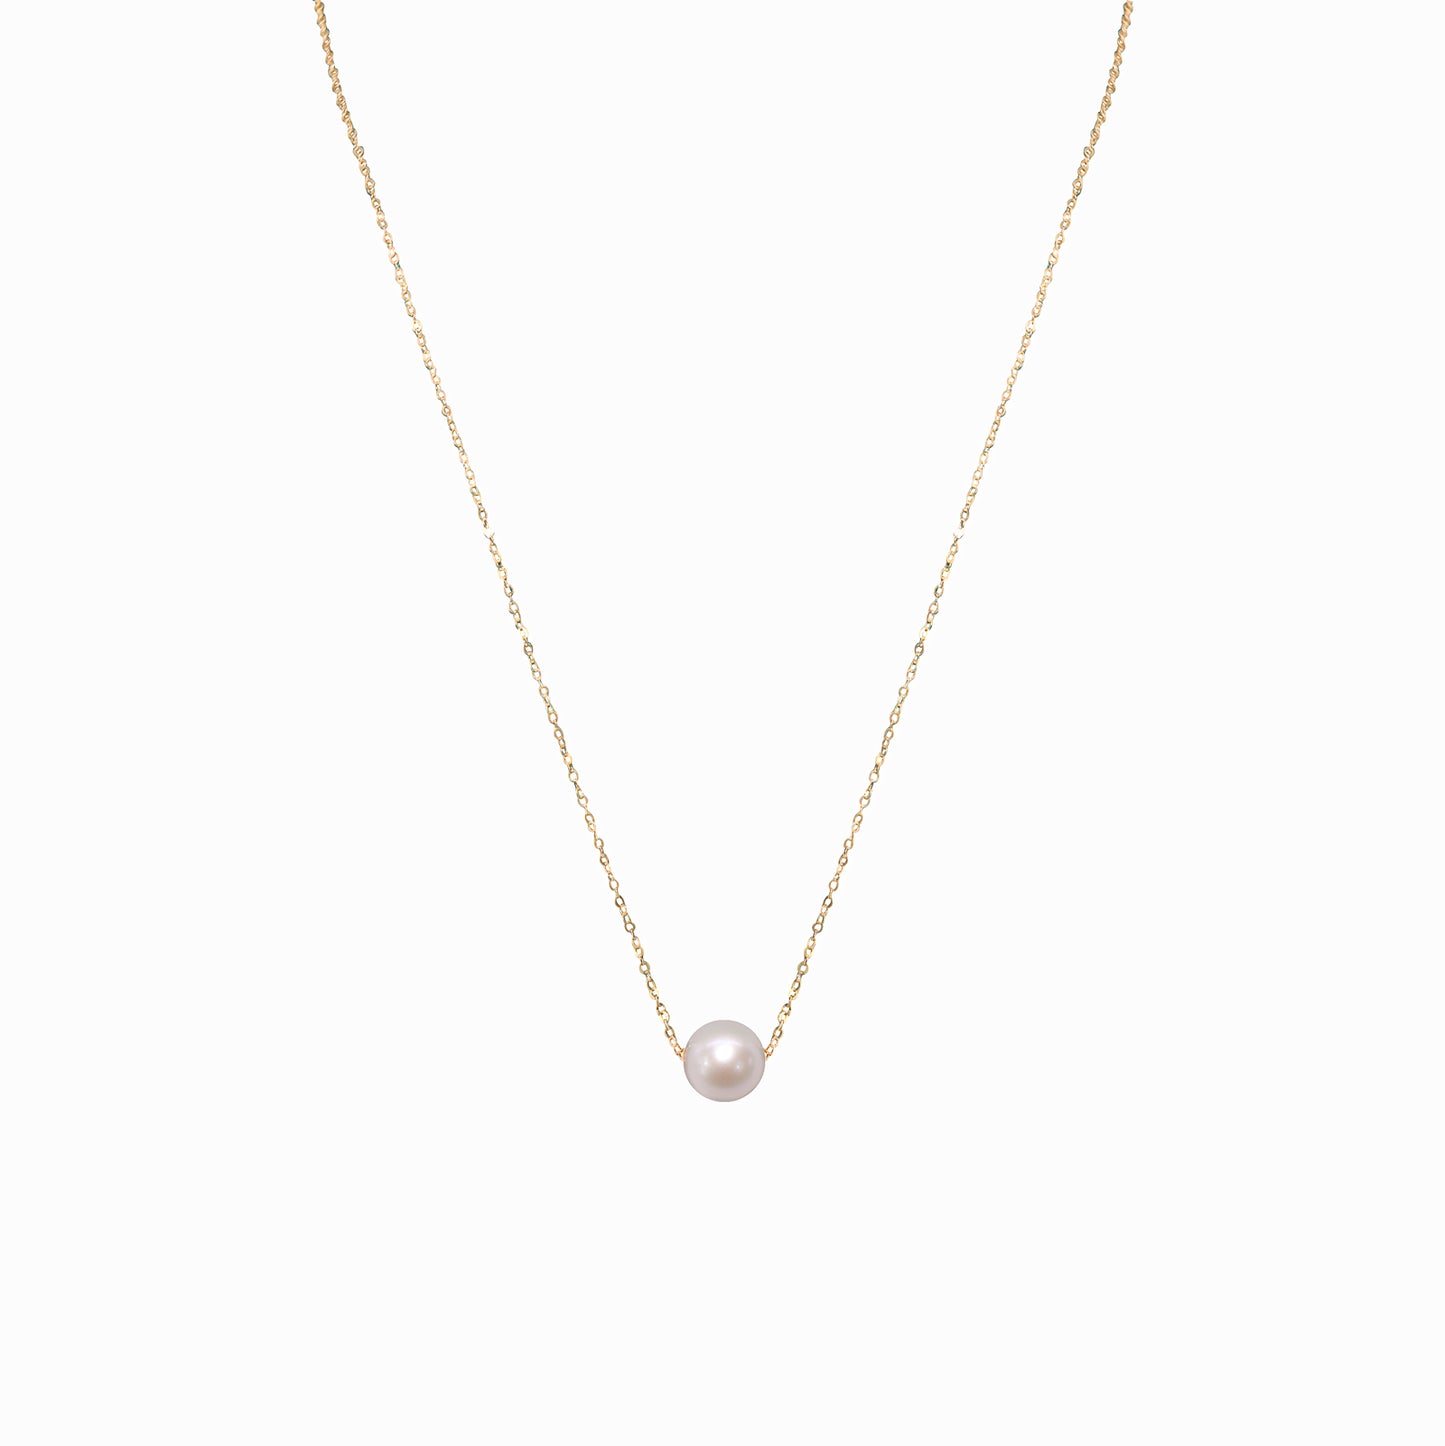 7mm Gold-Filled Pearl Necklace